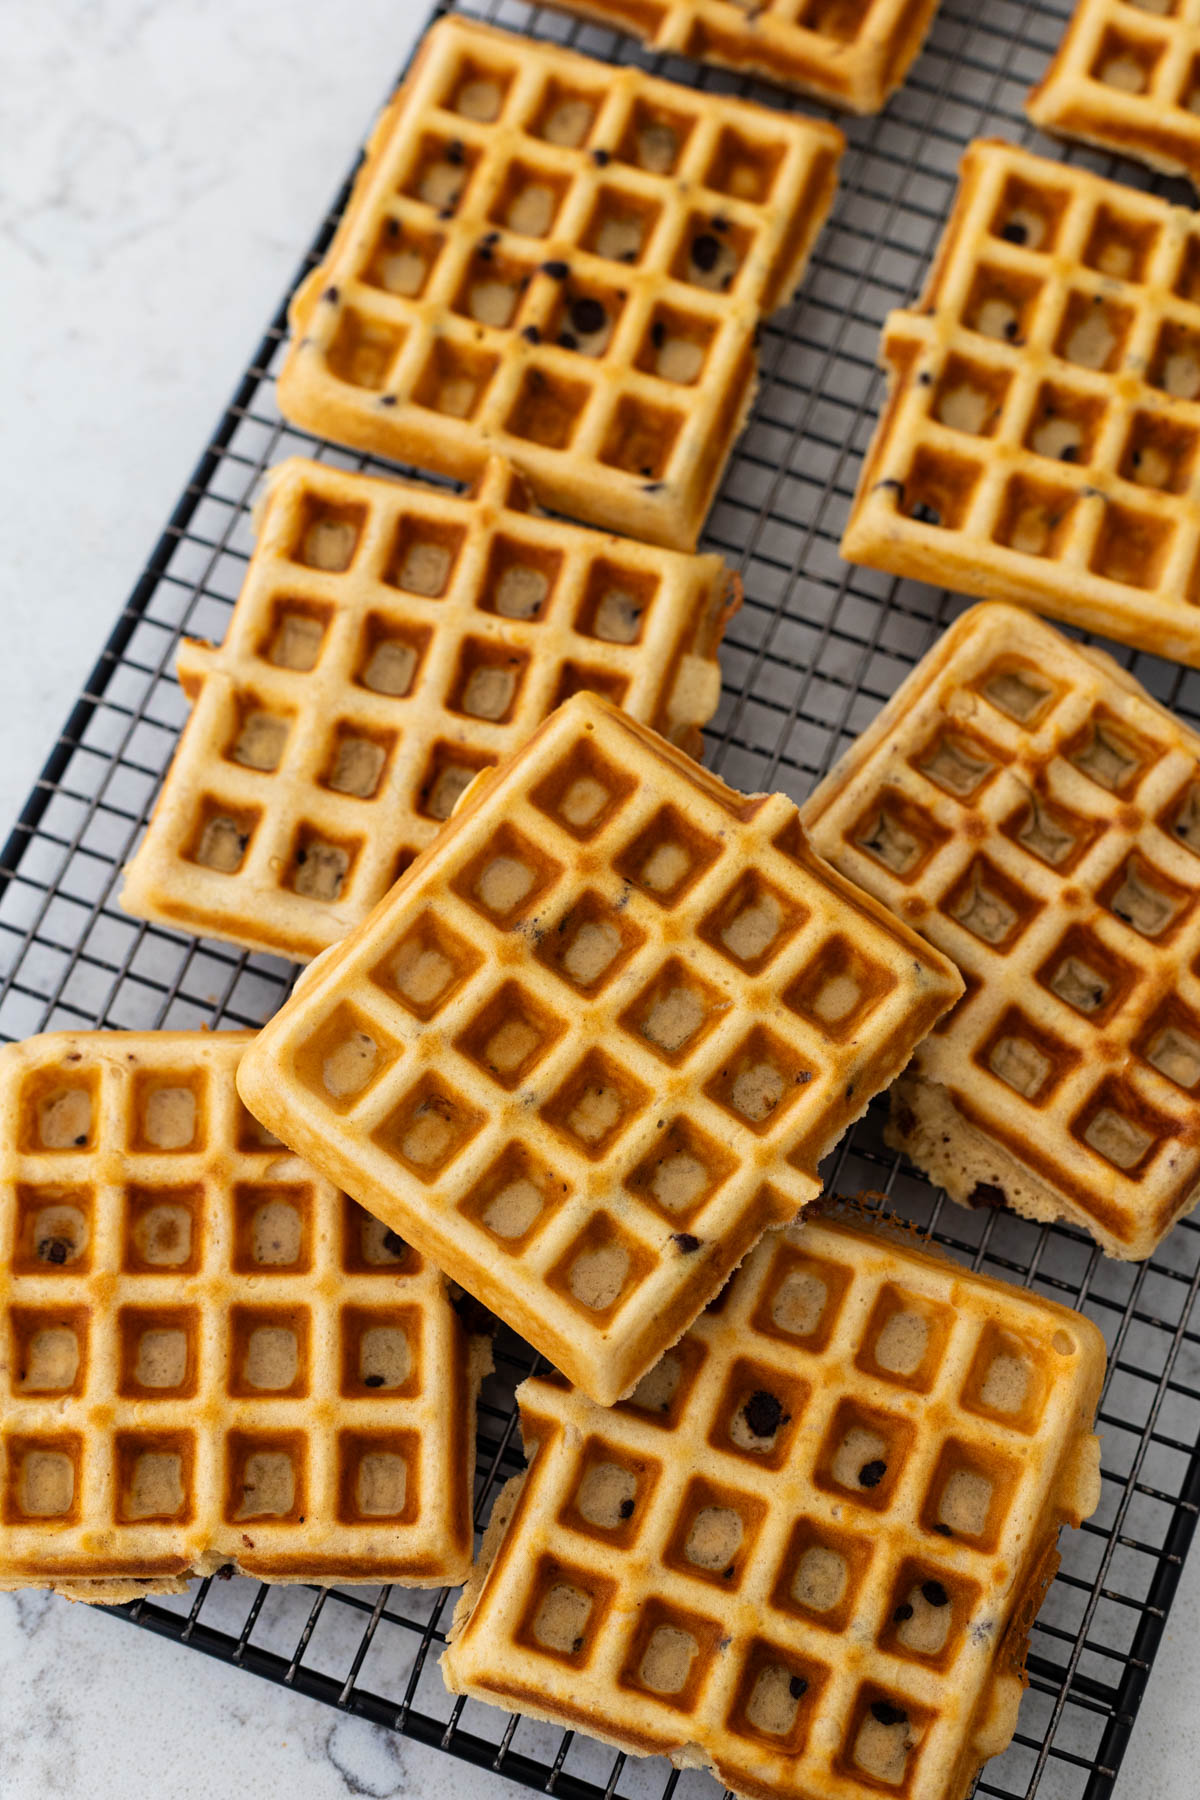 The chocolate chip waffles are cooling on the rack before freezing.